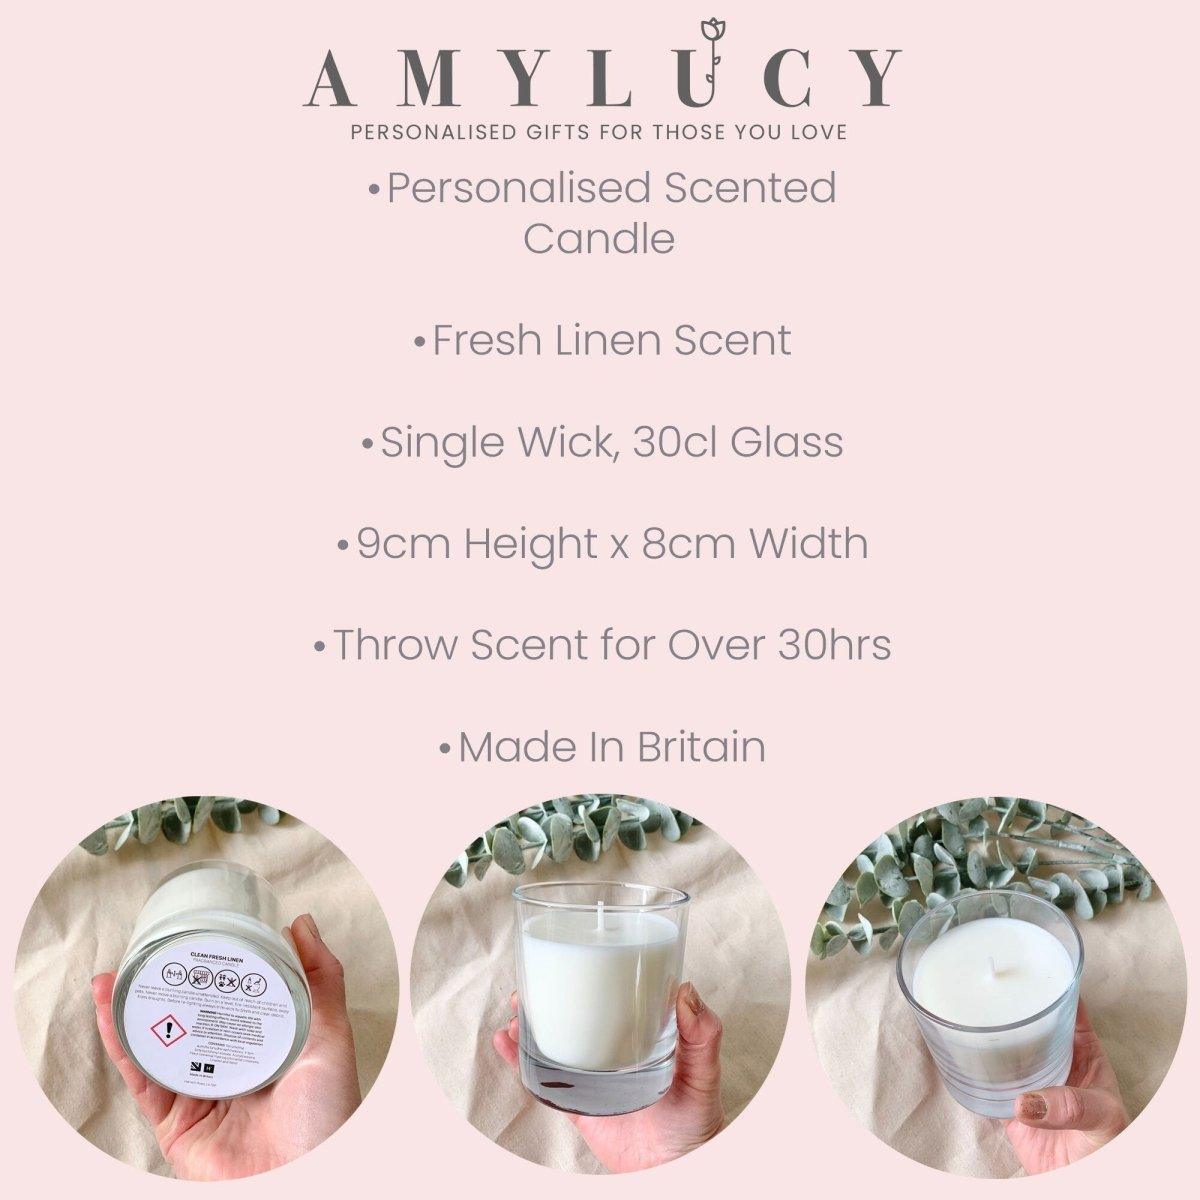 Personalised Thank You Candle, Custom Thank You Gifts, Grateful Gifts, Thank You Friend Gift, Appreciation Gifts, Personalised Candle - Amy Lucy